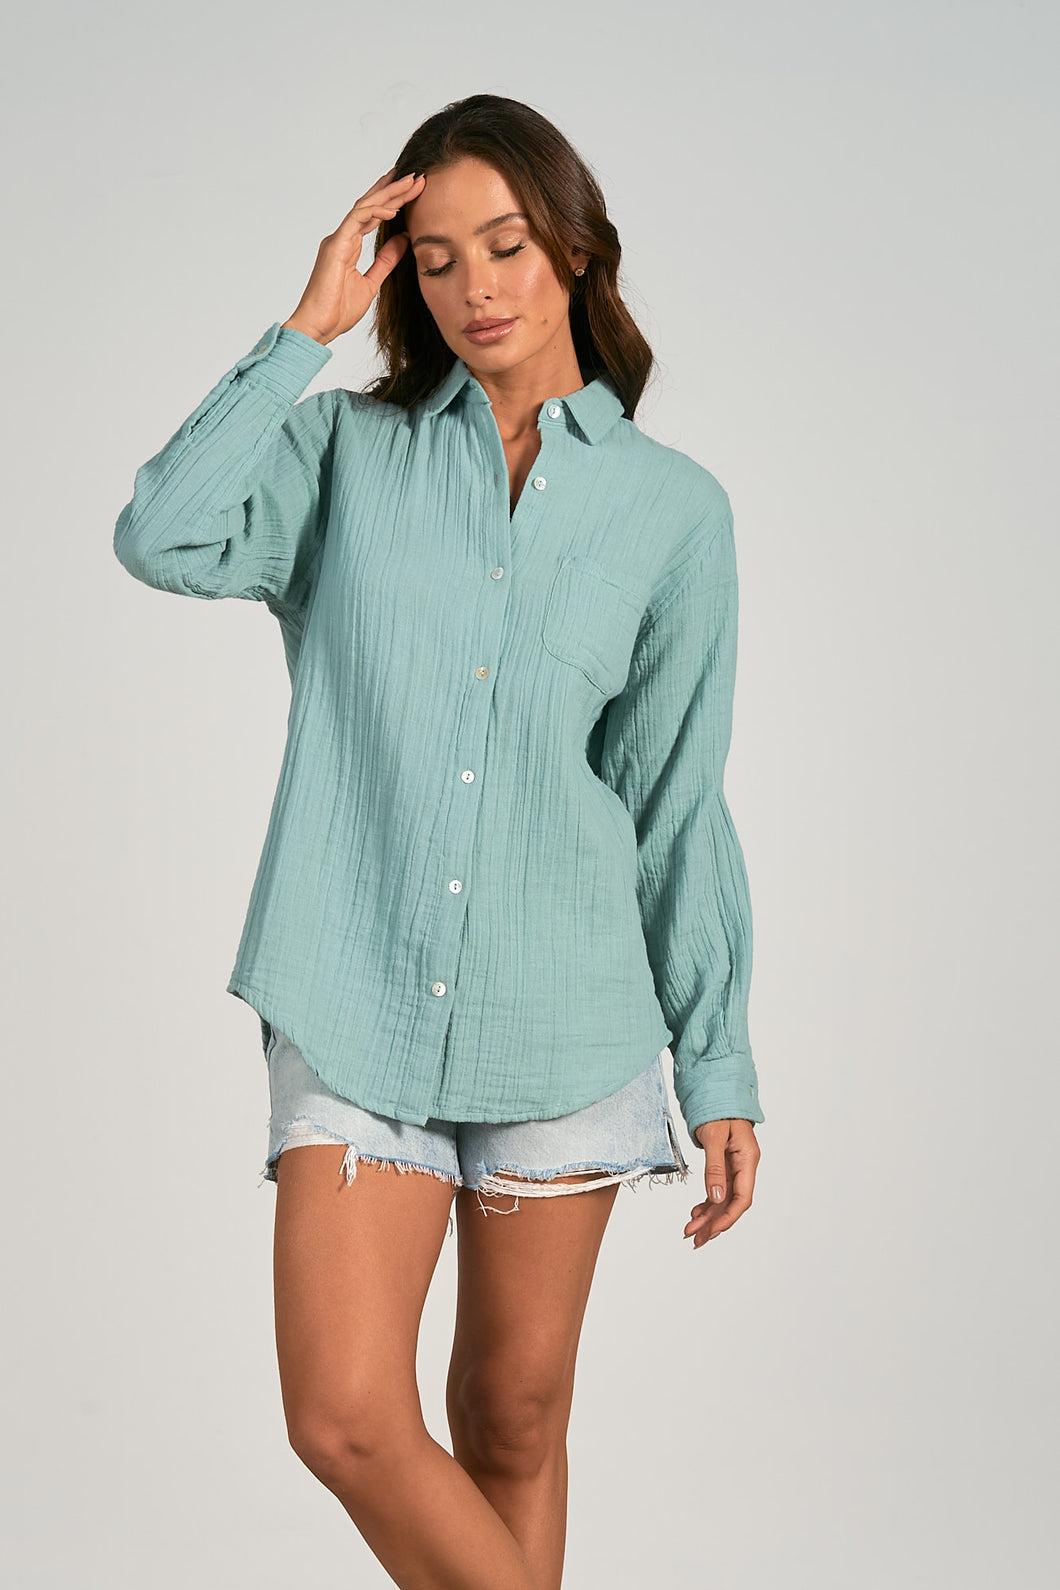 Oversized Boyfriend Shirt for Women in Blue - Indie Indie Bang! Bang!